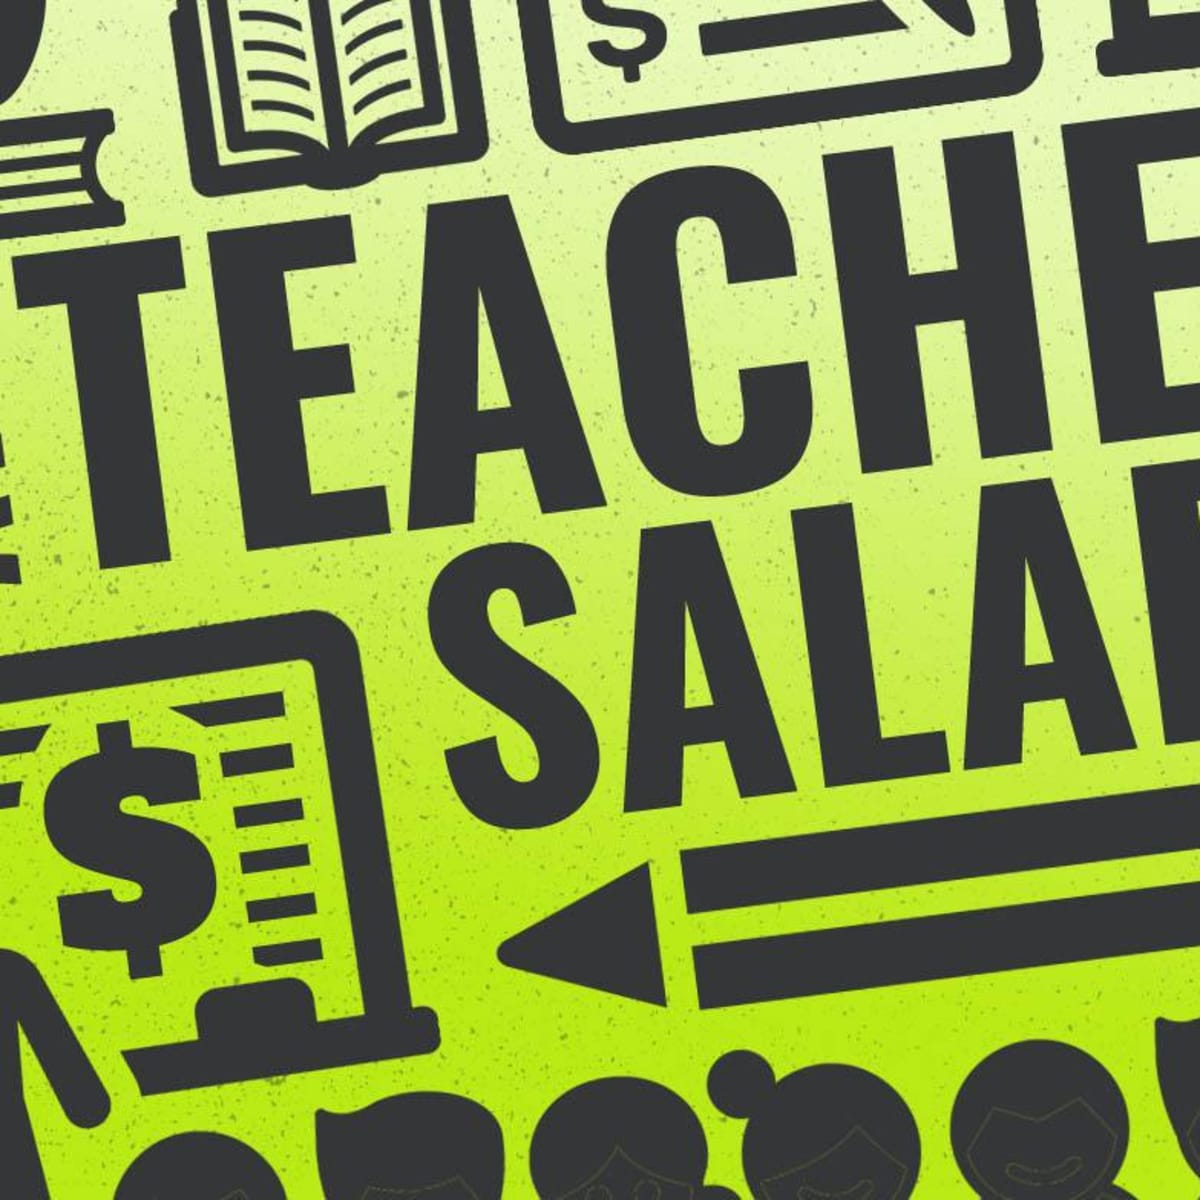 How Much Does A Teacher Make In A Week